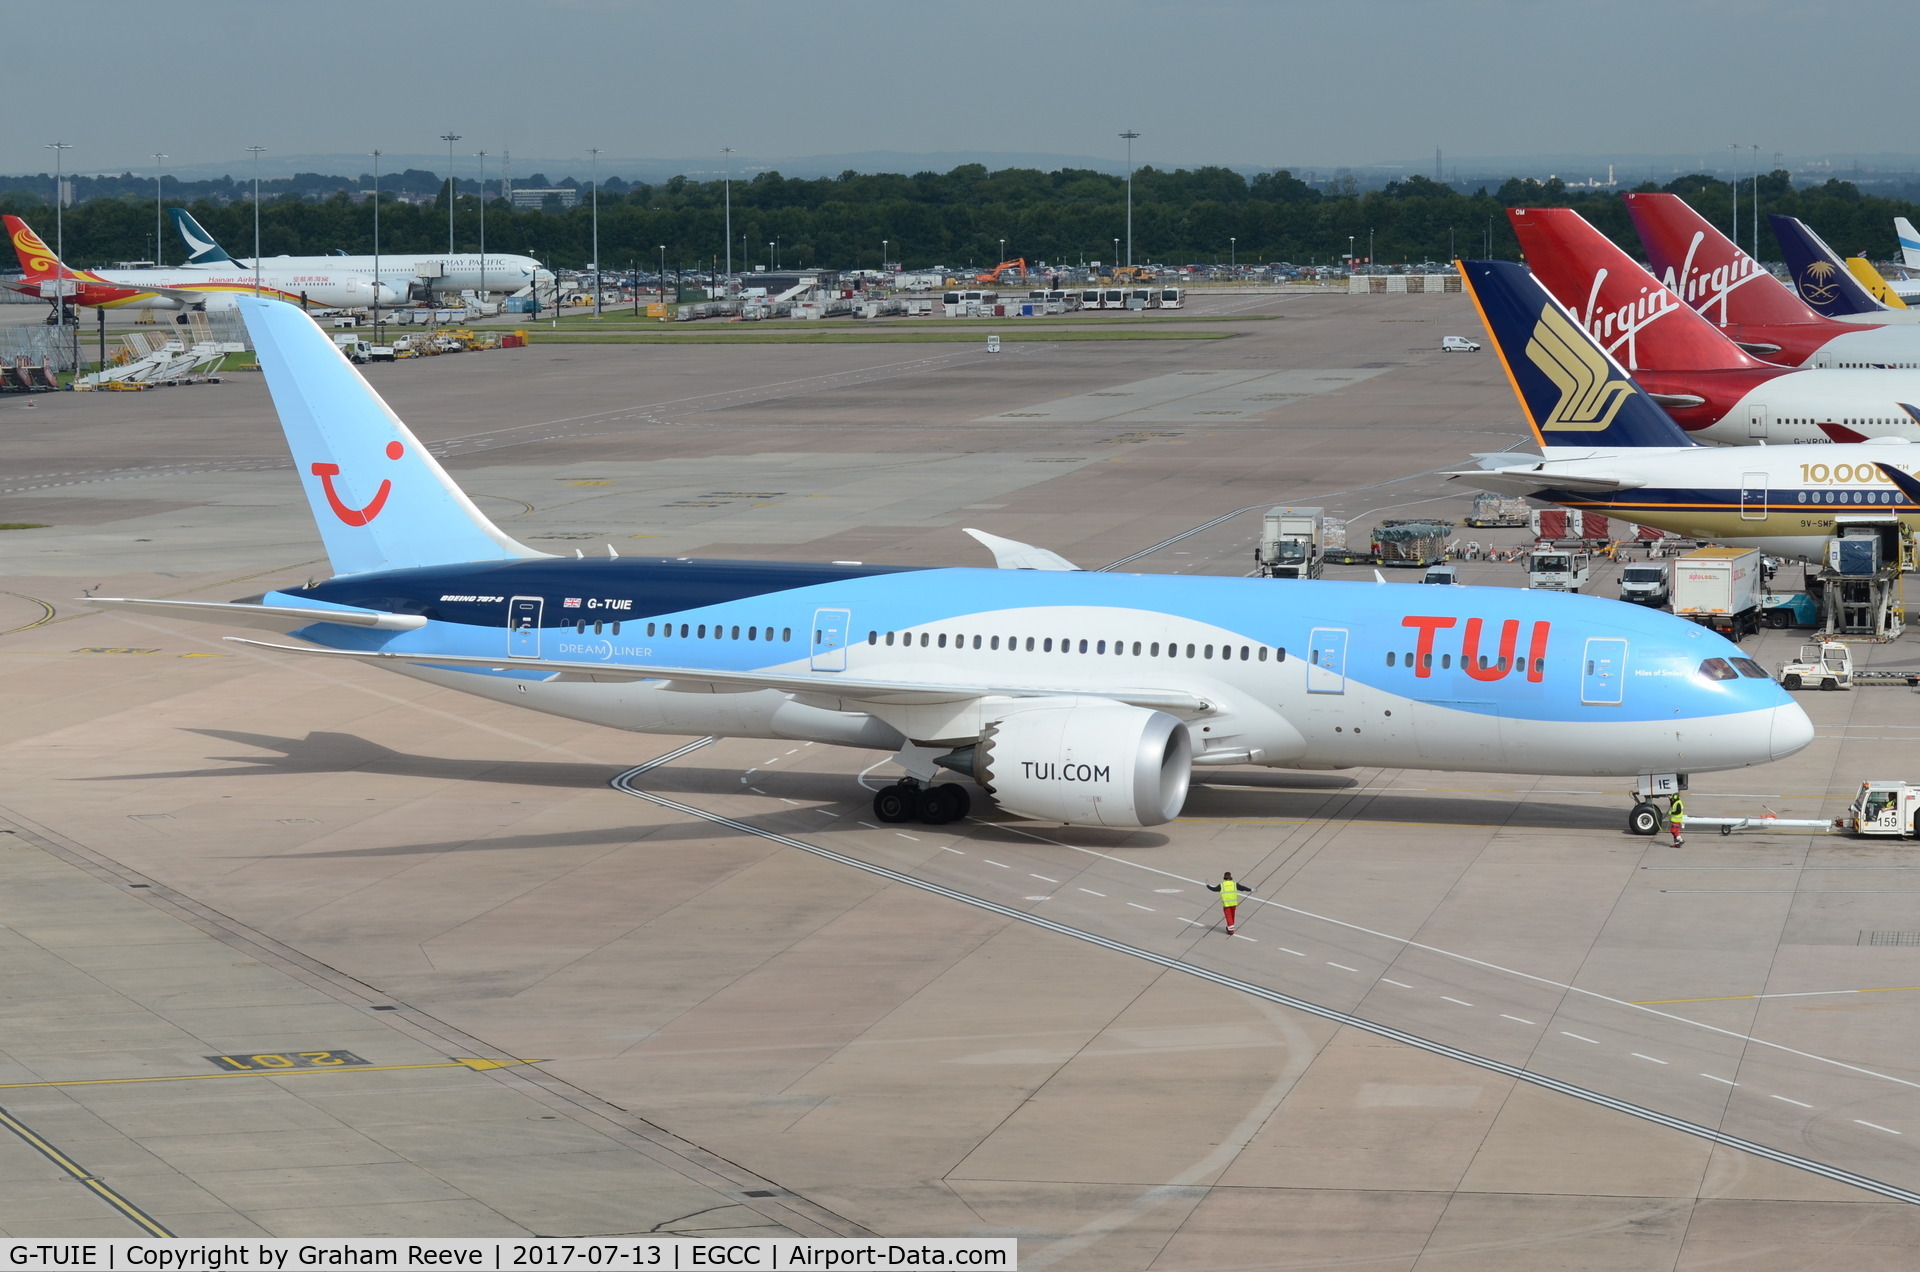 G-TUIE, 2014 Boeing 787-8 Dreamliner C/N 37227, About to depart from Manchester.